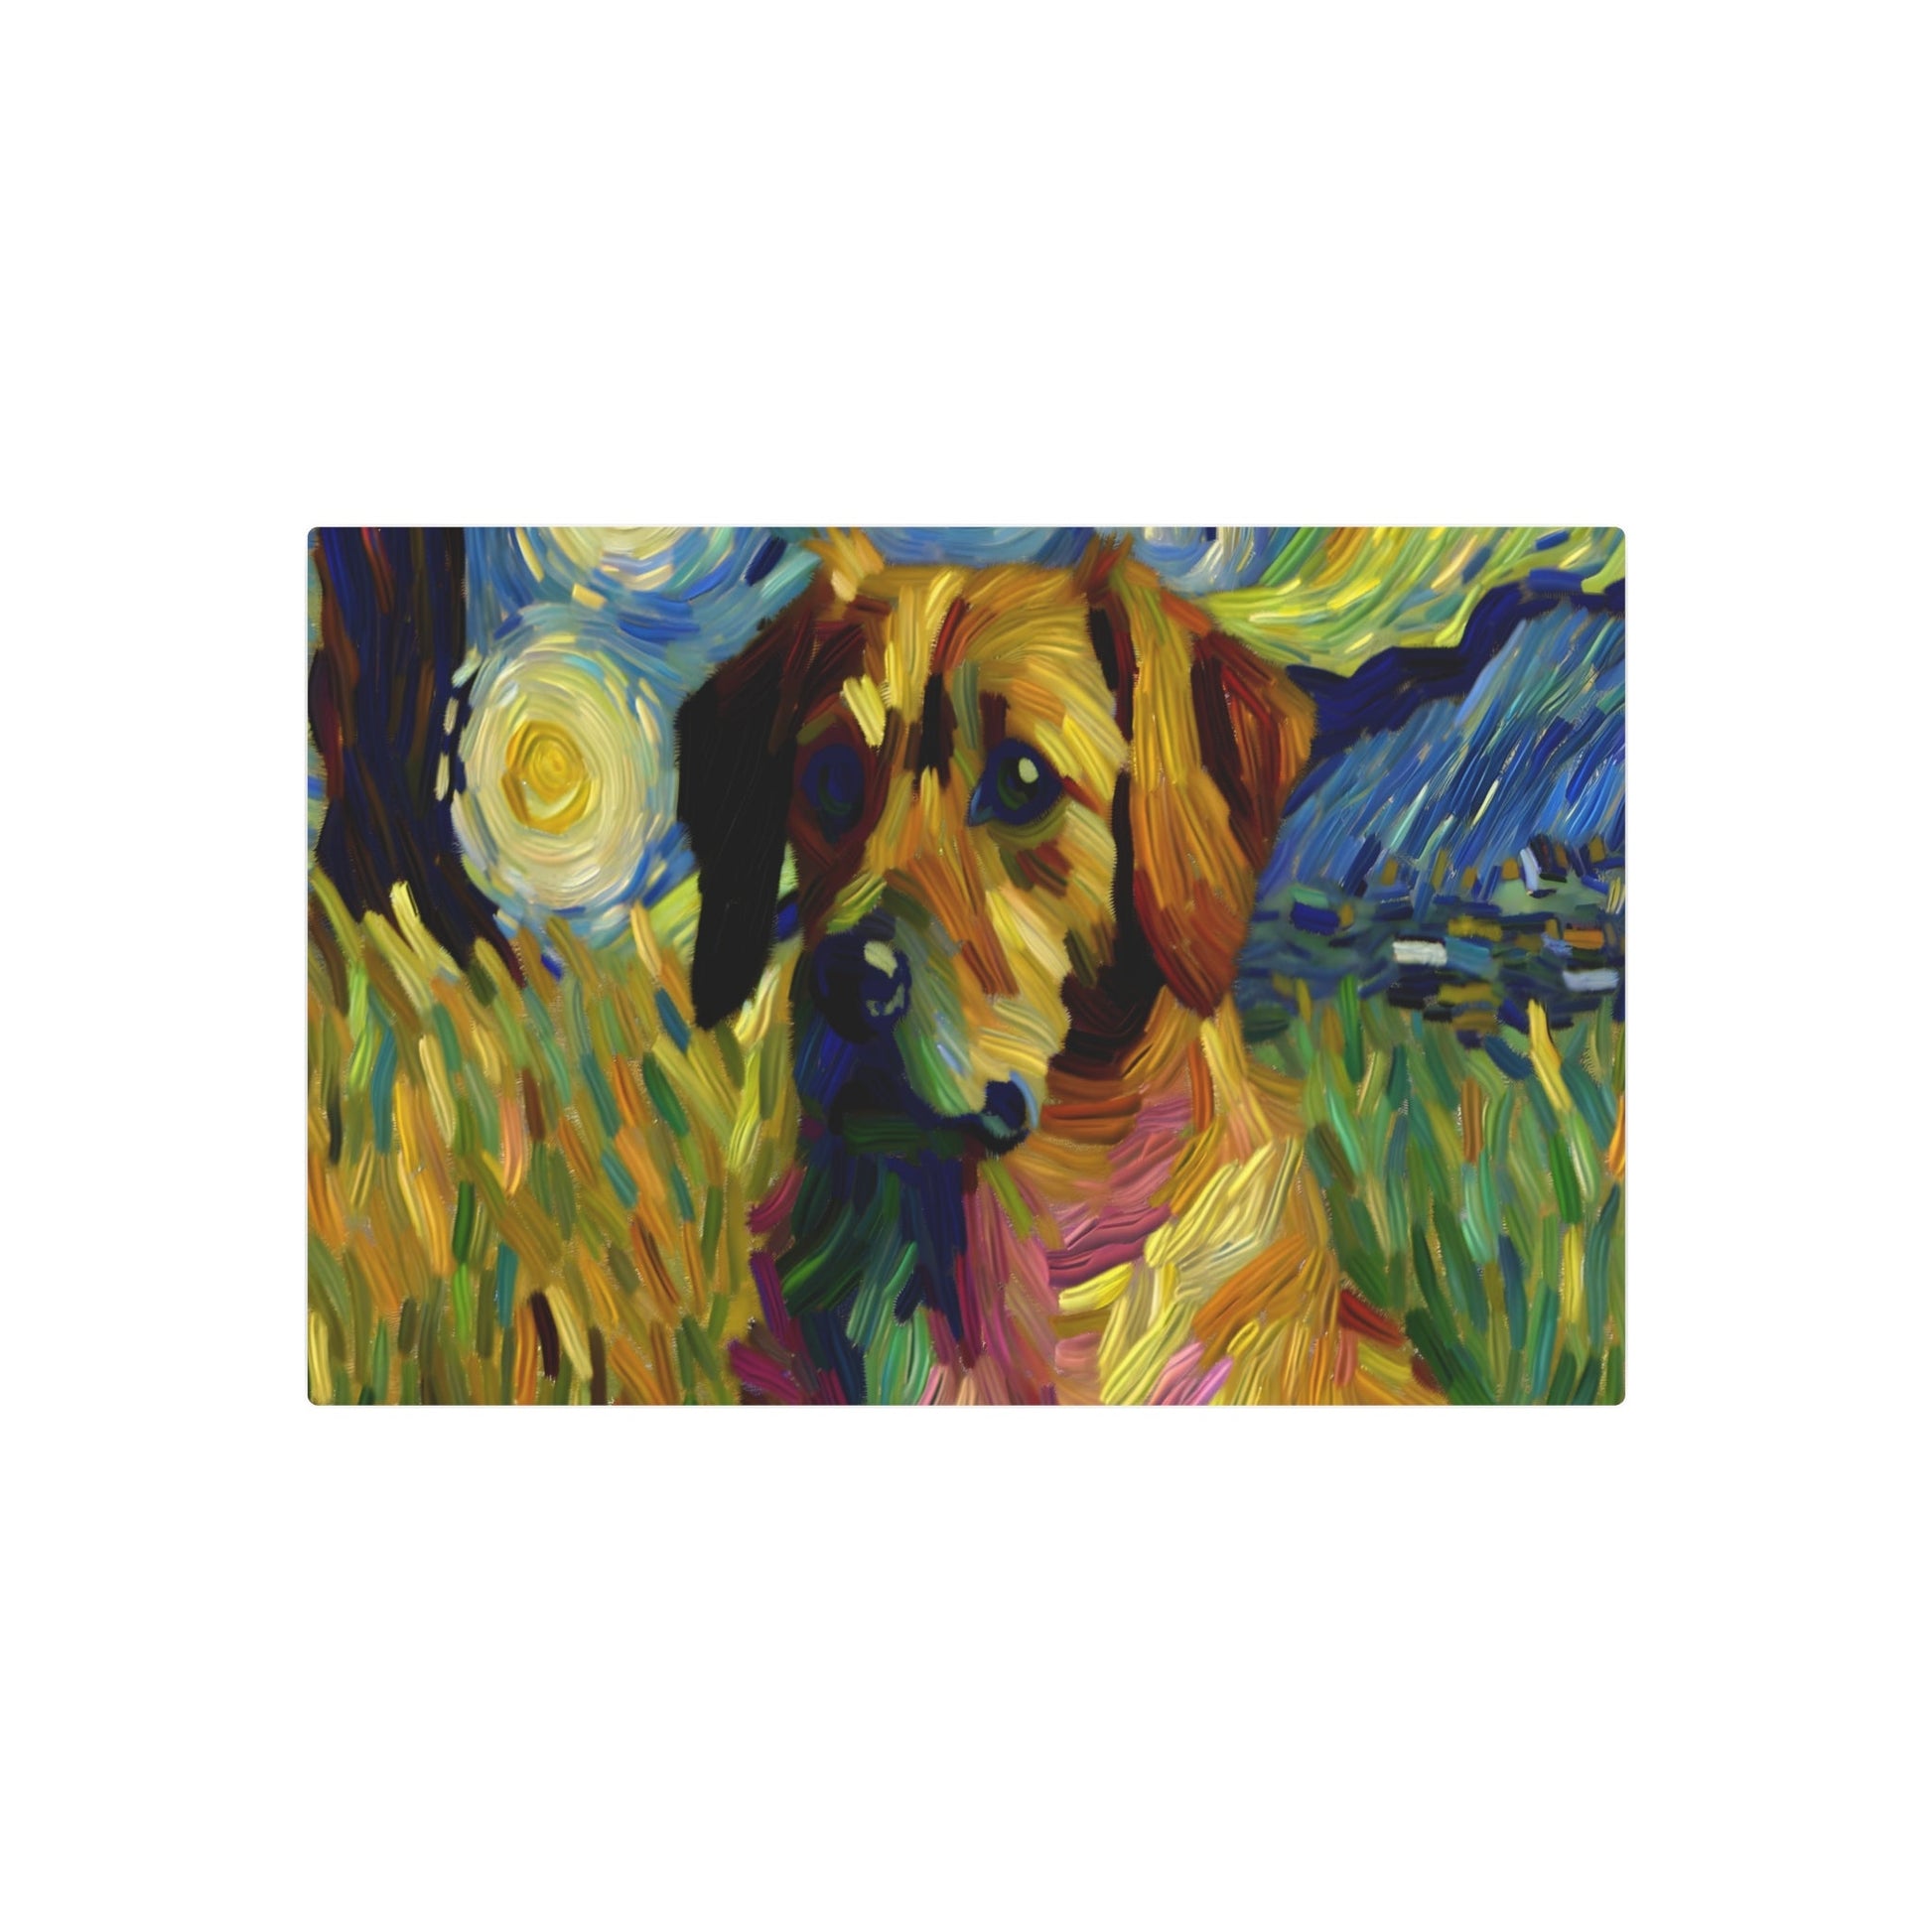 Metal Poster Art | "Post-Impressionistic Vibrant Dog Painting - Thick Textured Brushstrokes Inspired by Van Gogh's Starry Night - Western Art Styles - Metal Poster Art 30″ x 20″ (Horizontal) 0.12''